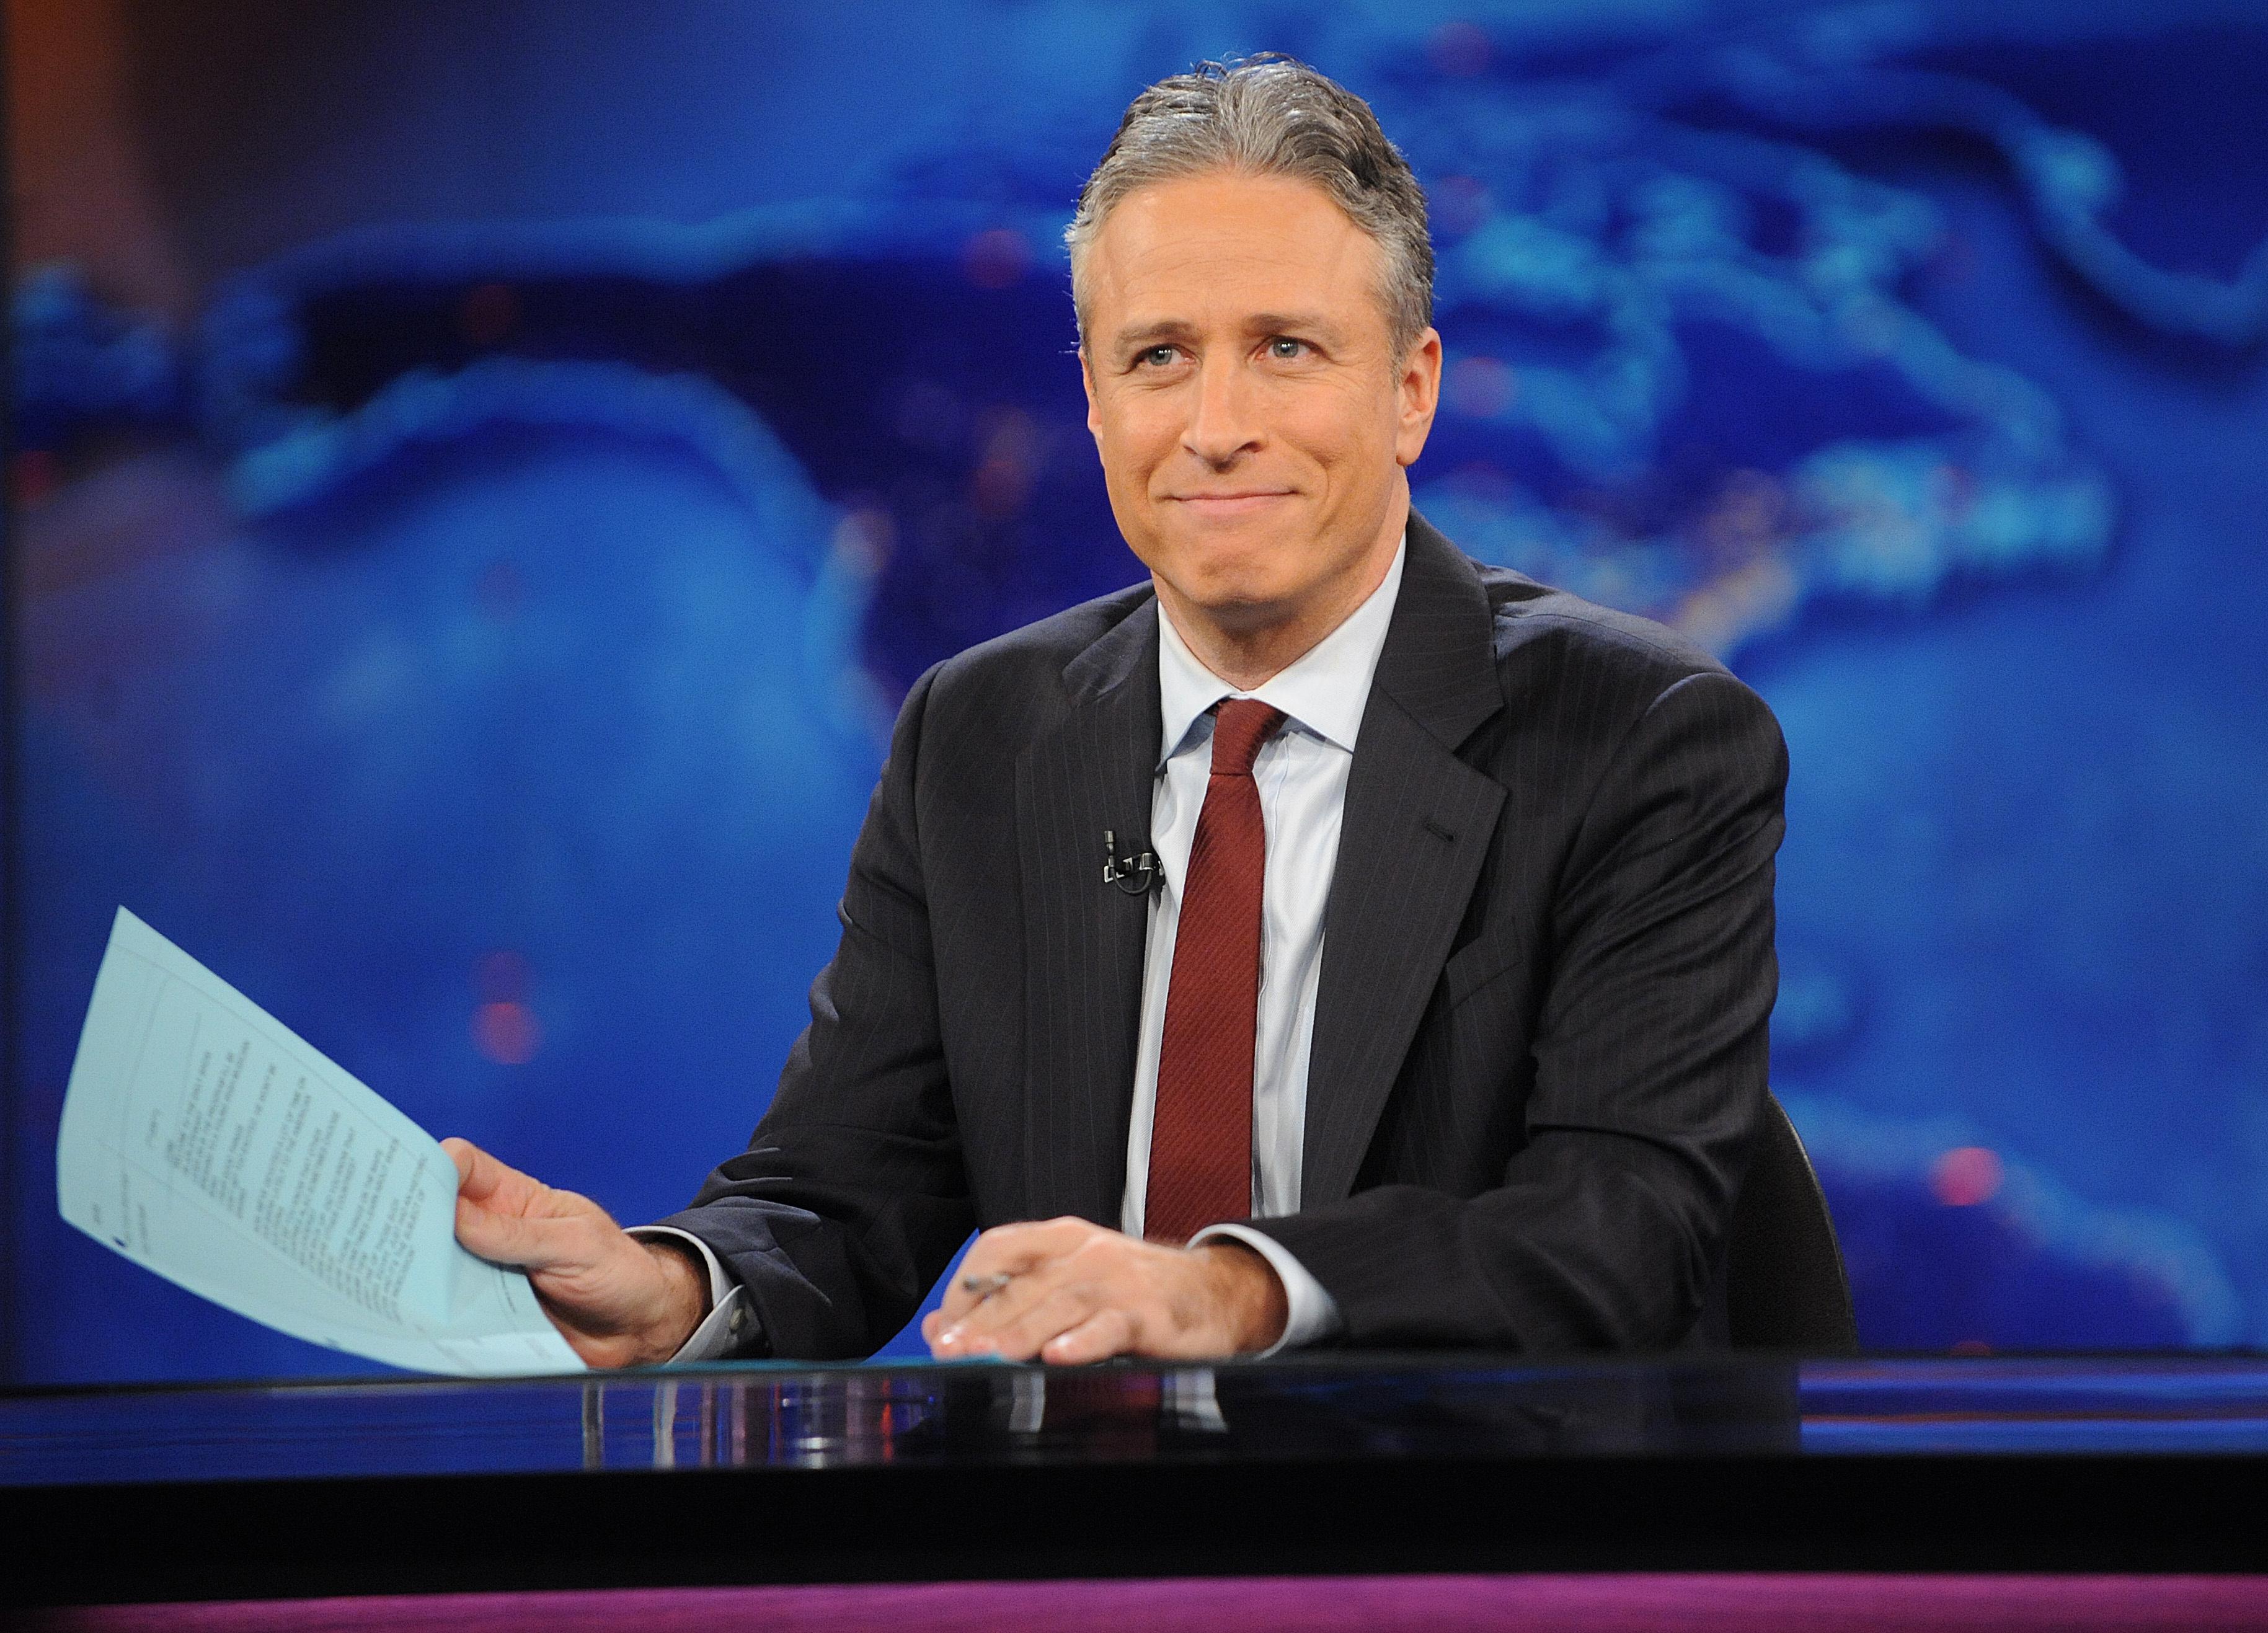 The Daily Show With Jon Stewart #4